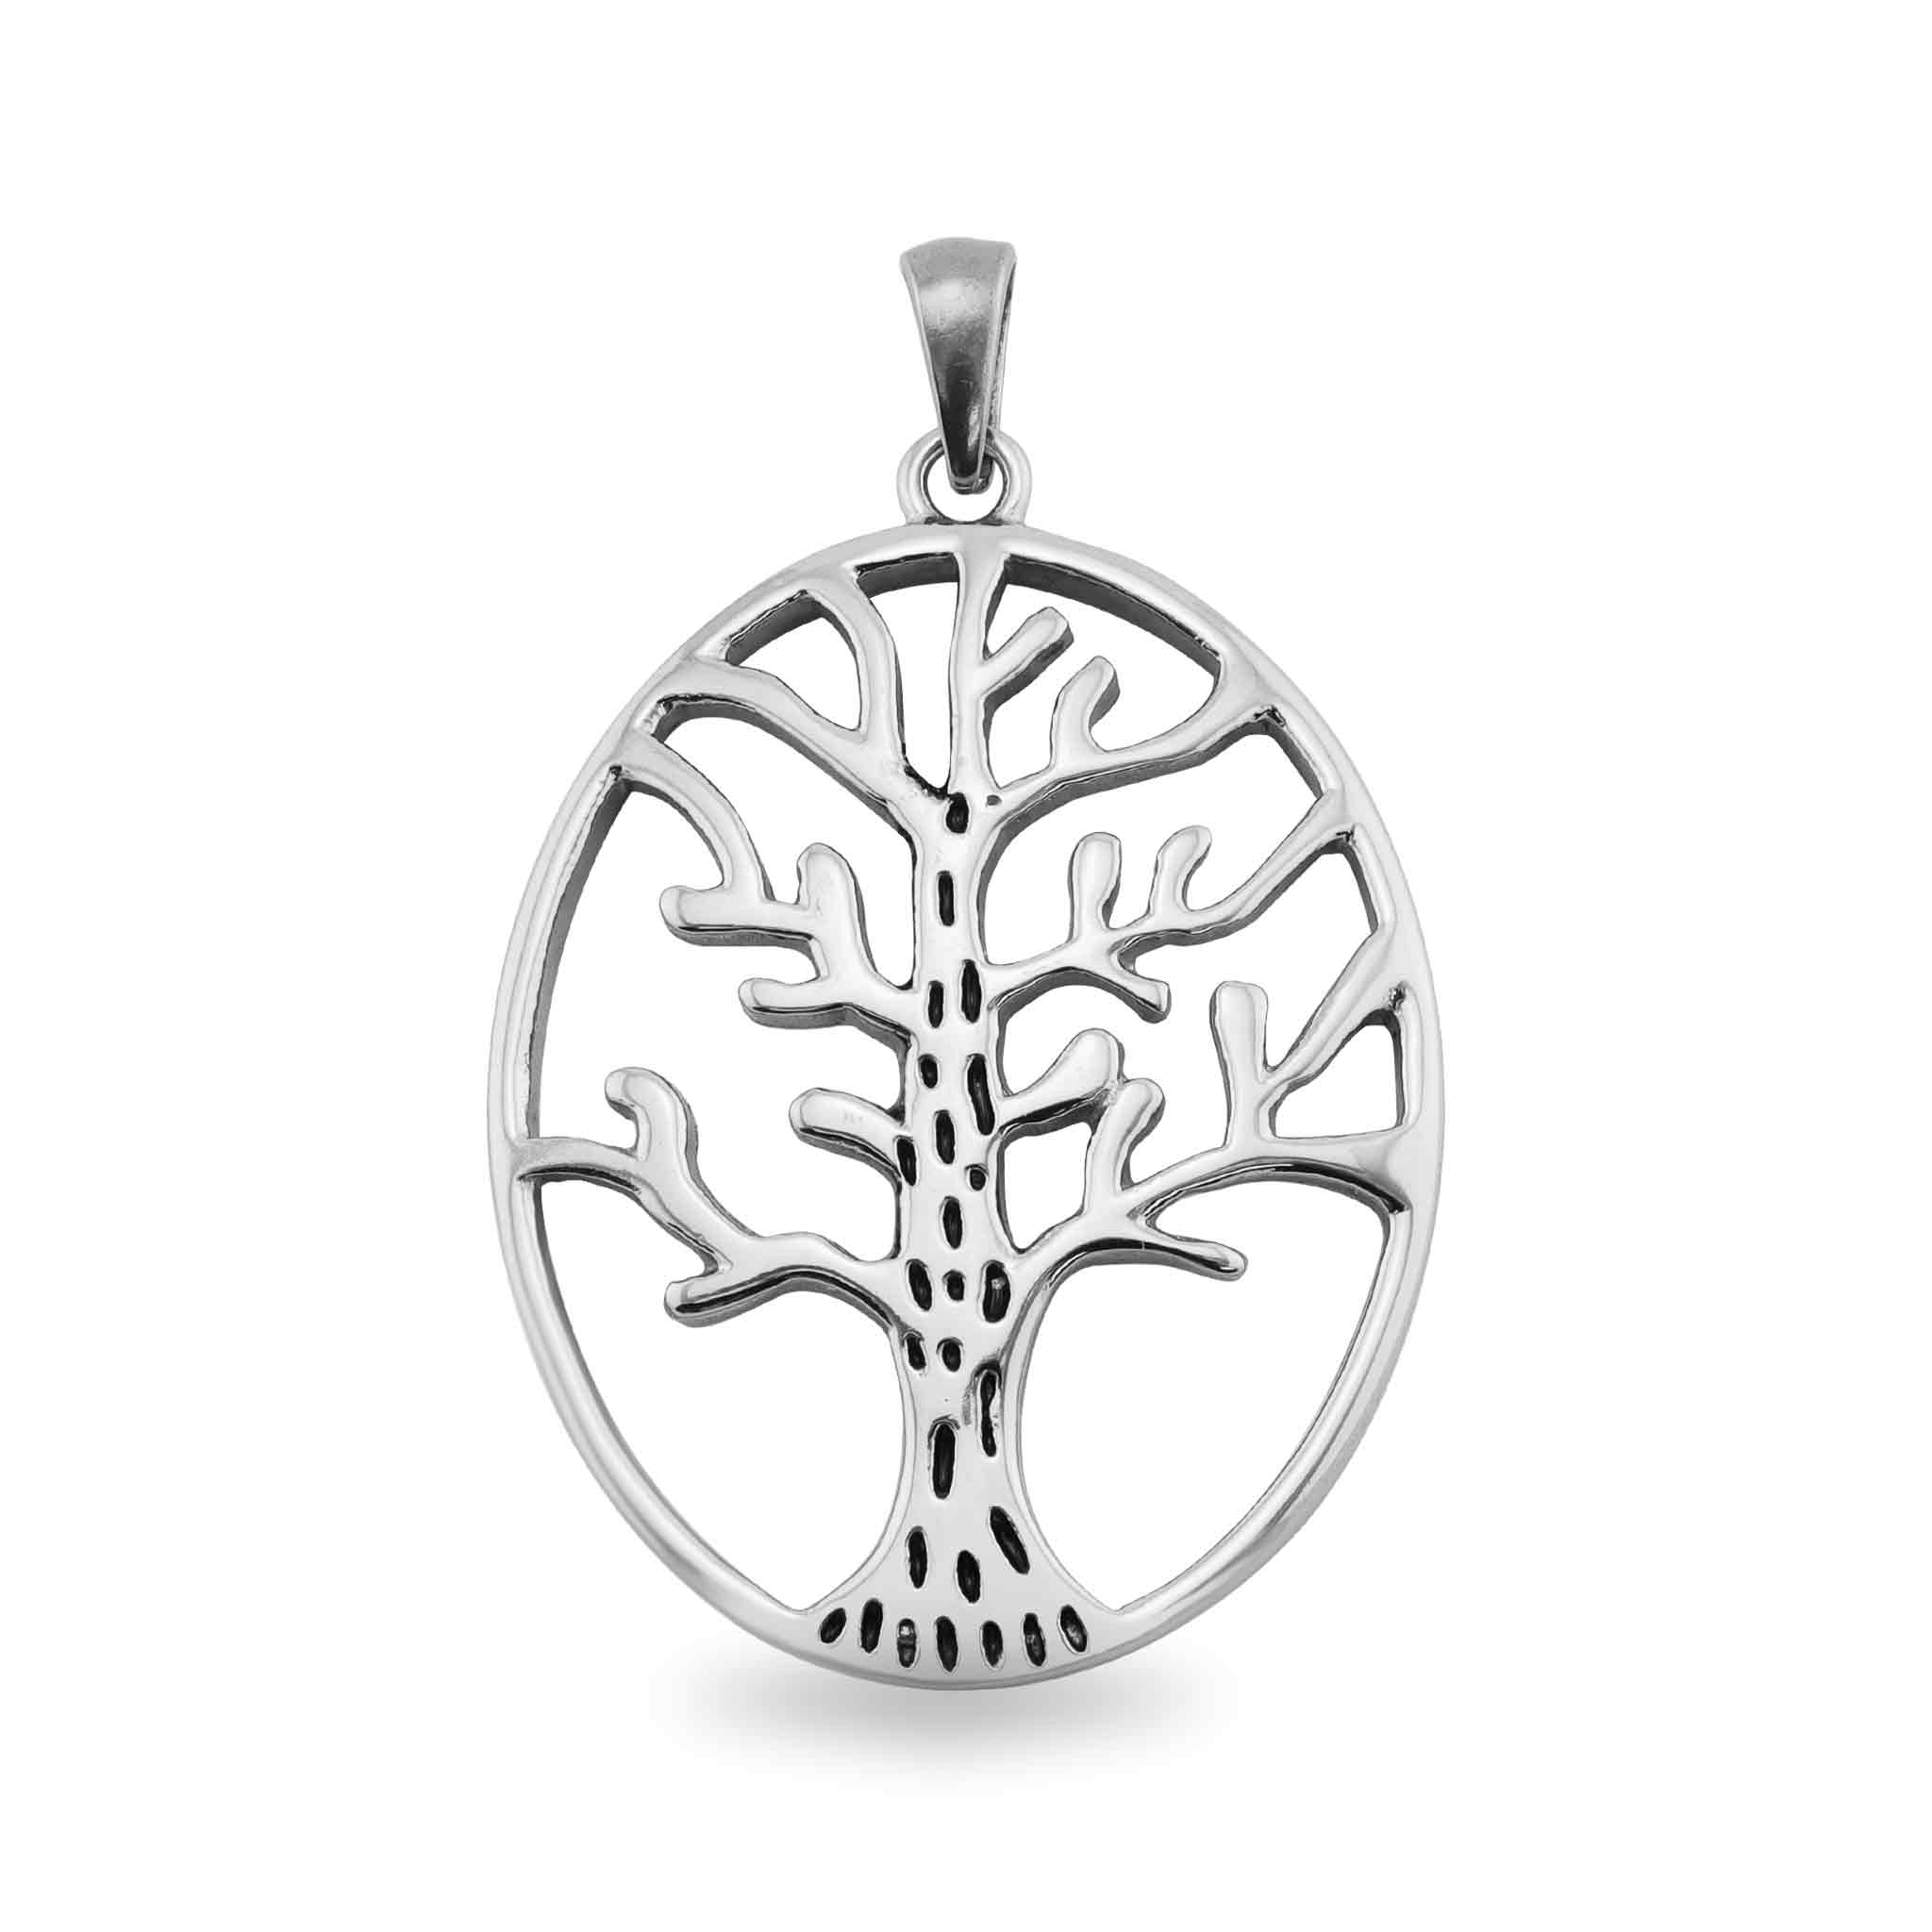 Stainless Steel Tree of Life Pendant / PDC9009